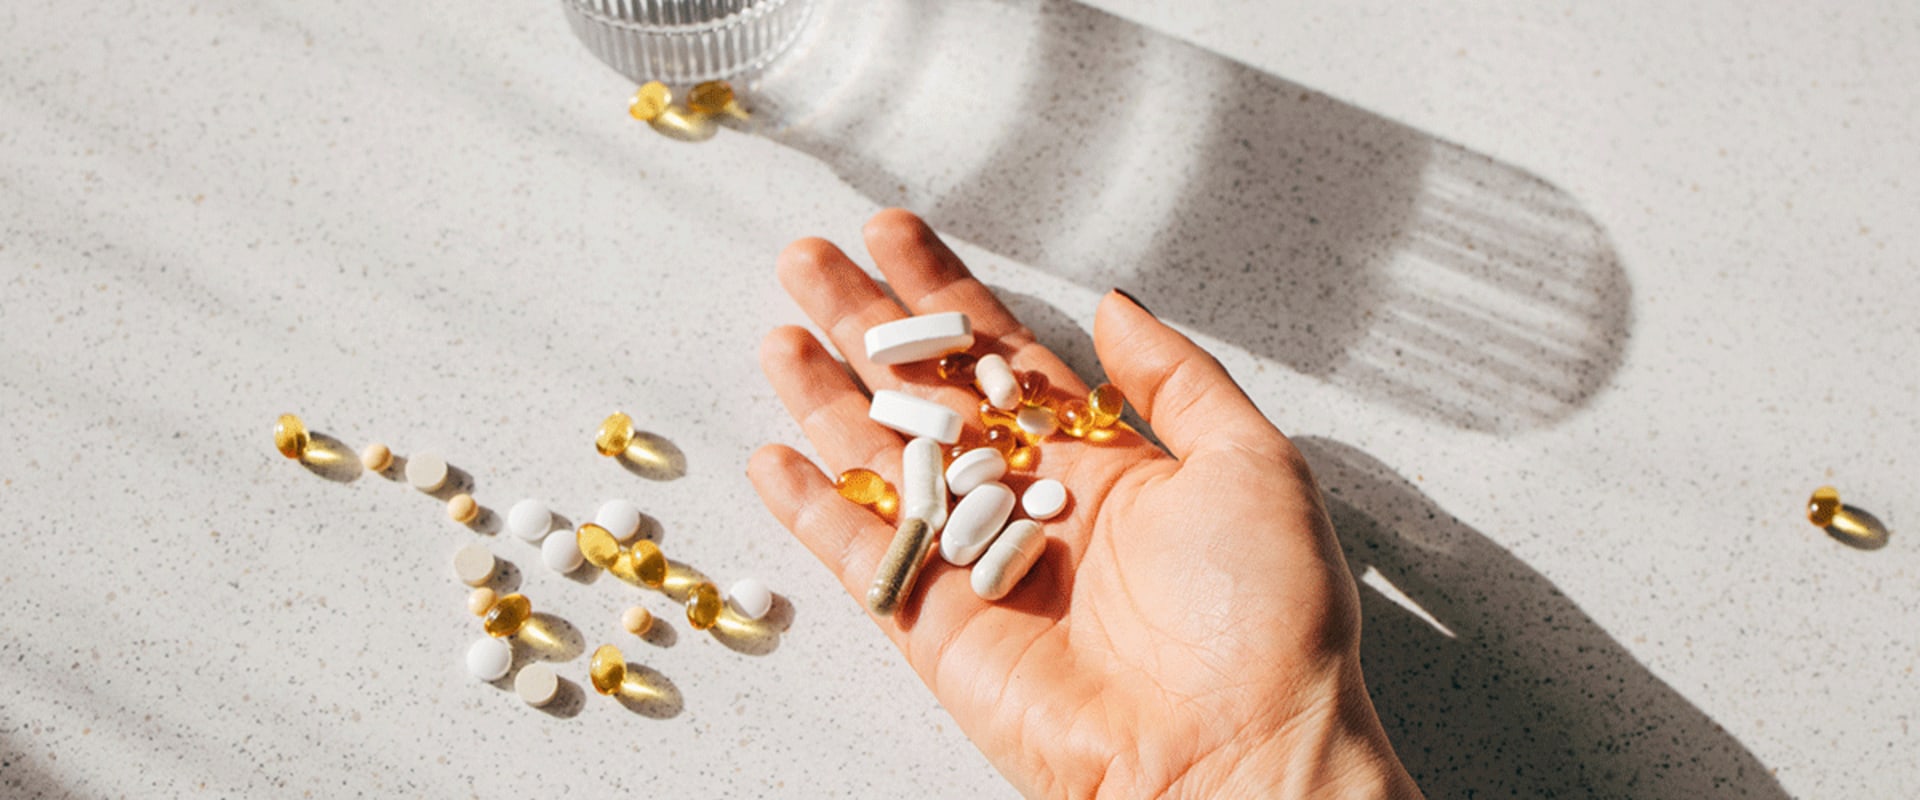 How long does it take for supplements to make a difference?